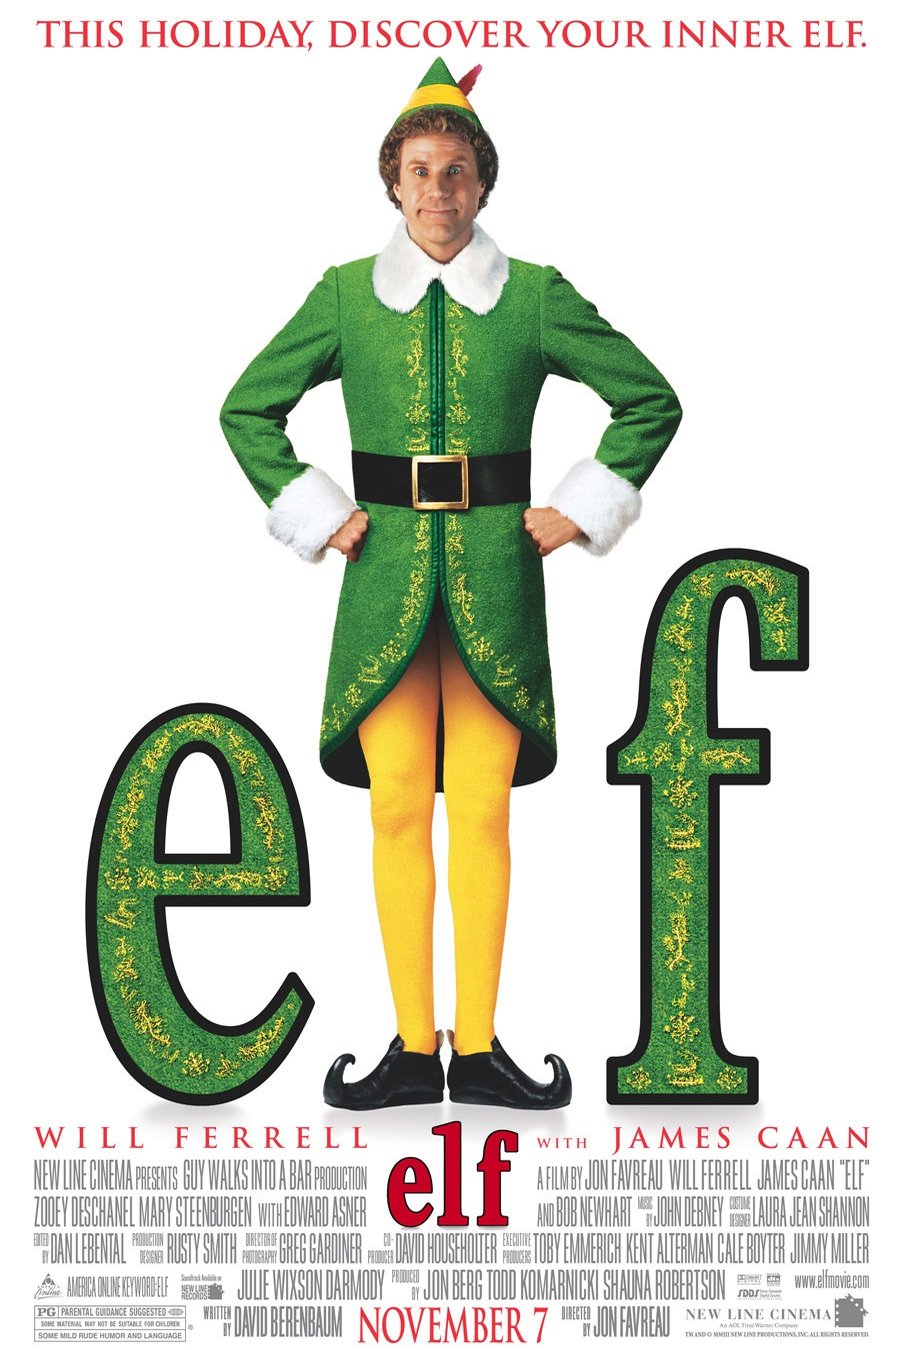 Poster of the movie Elf